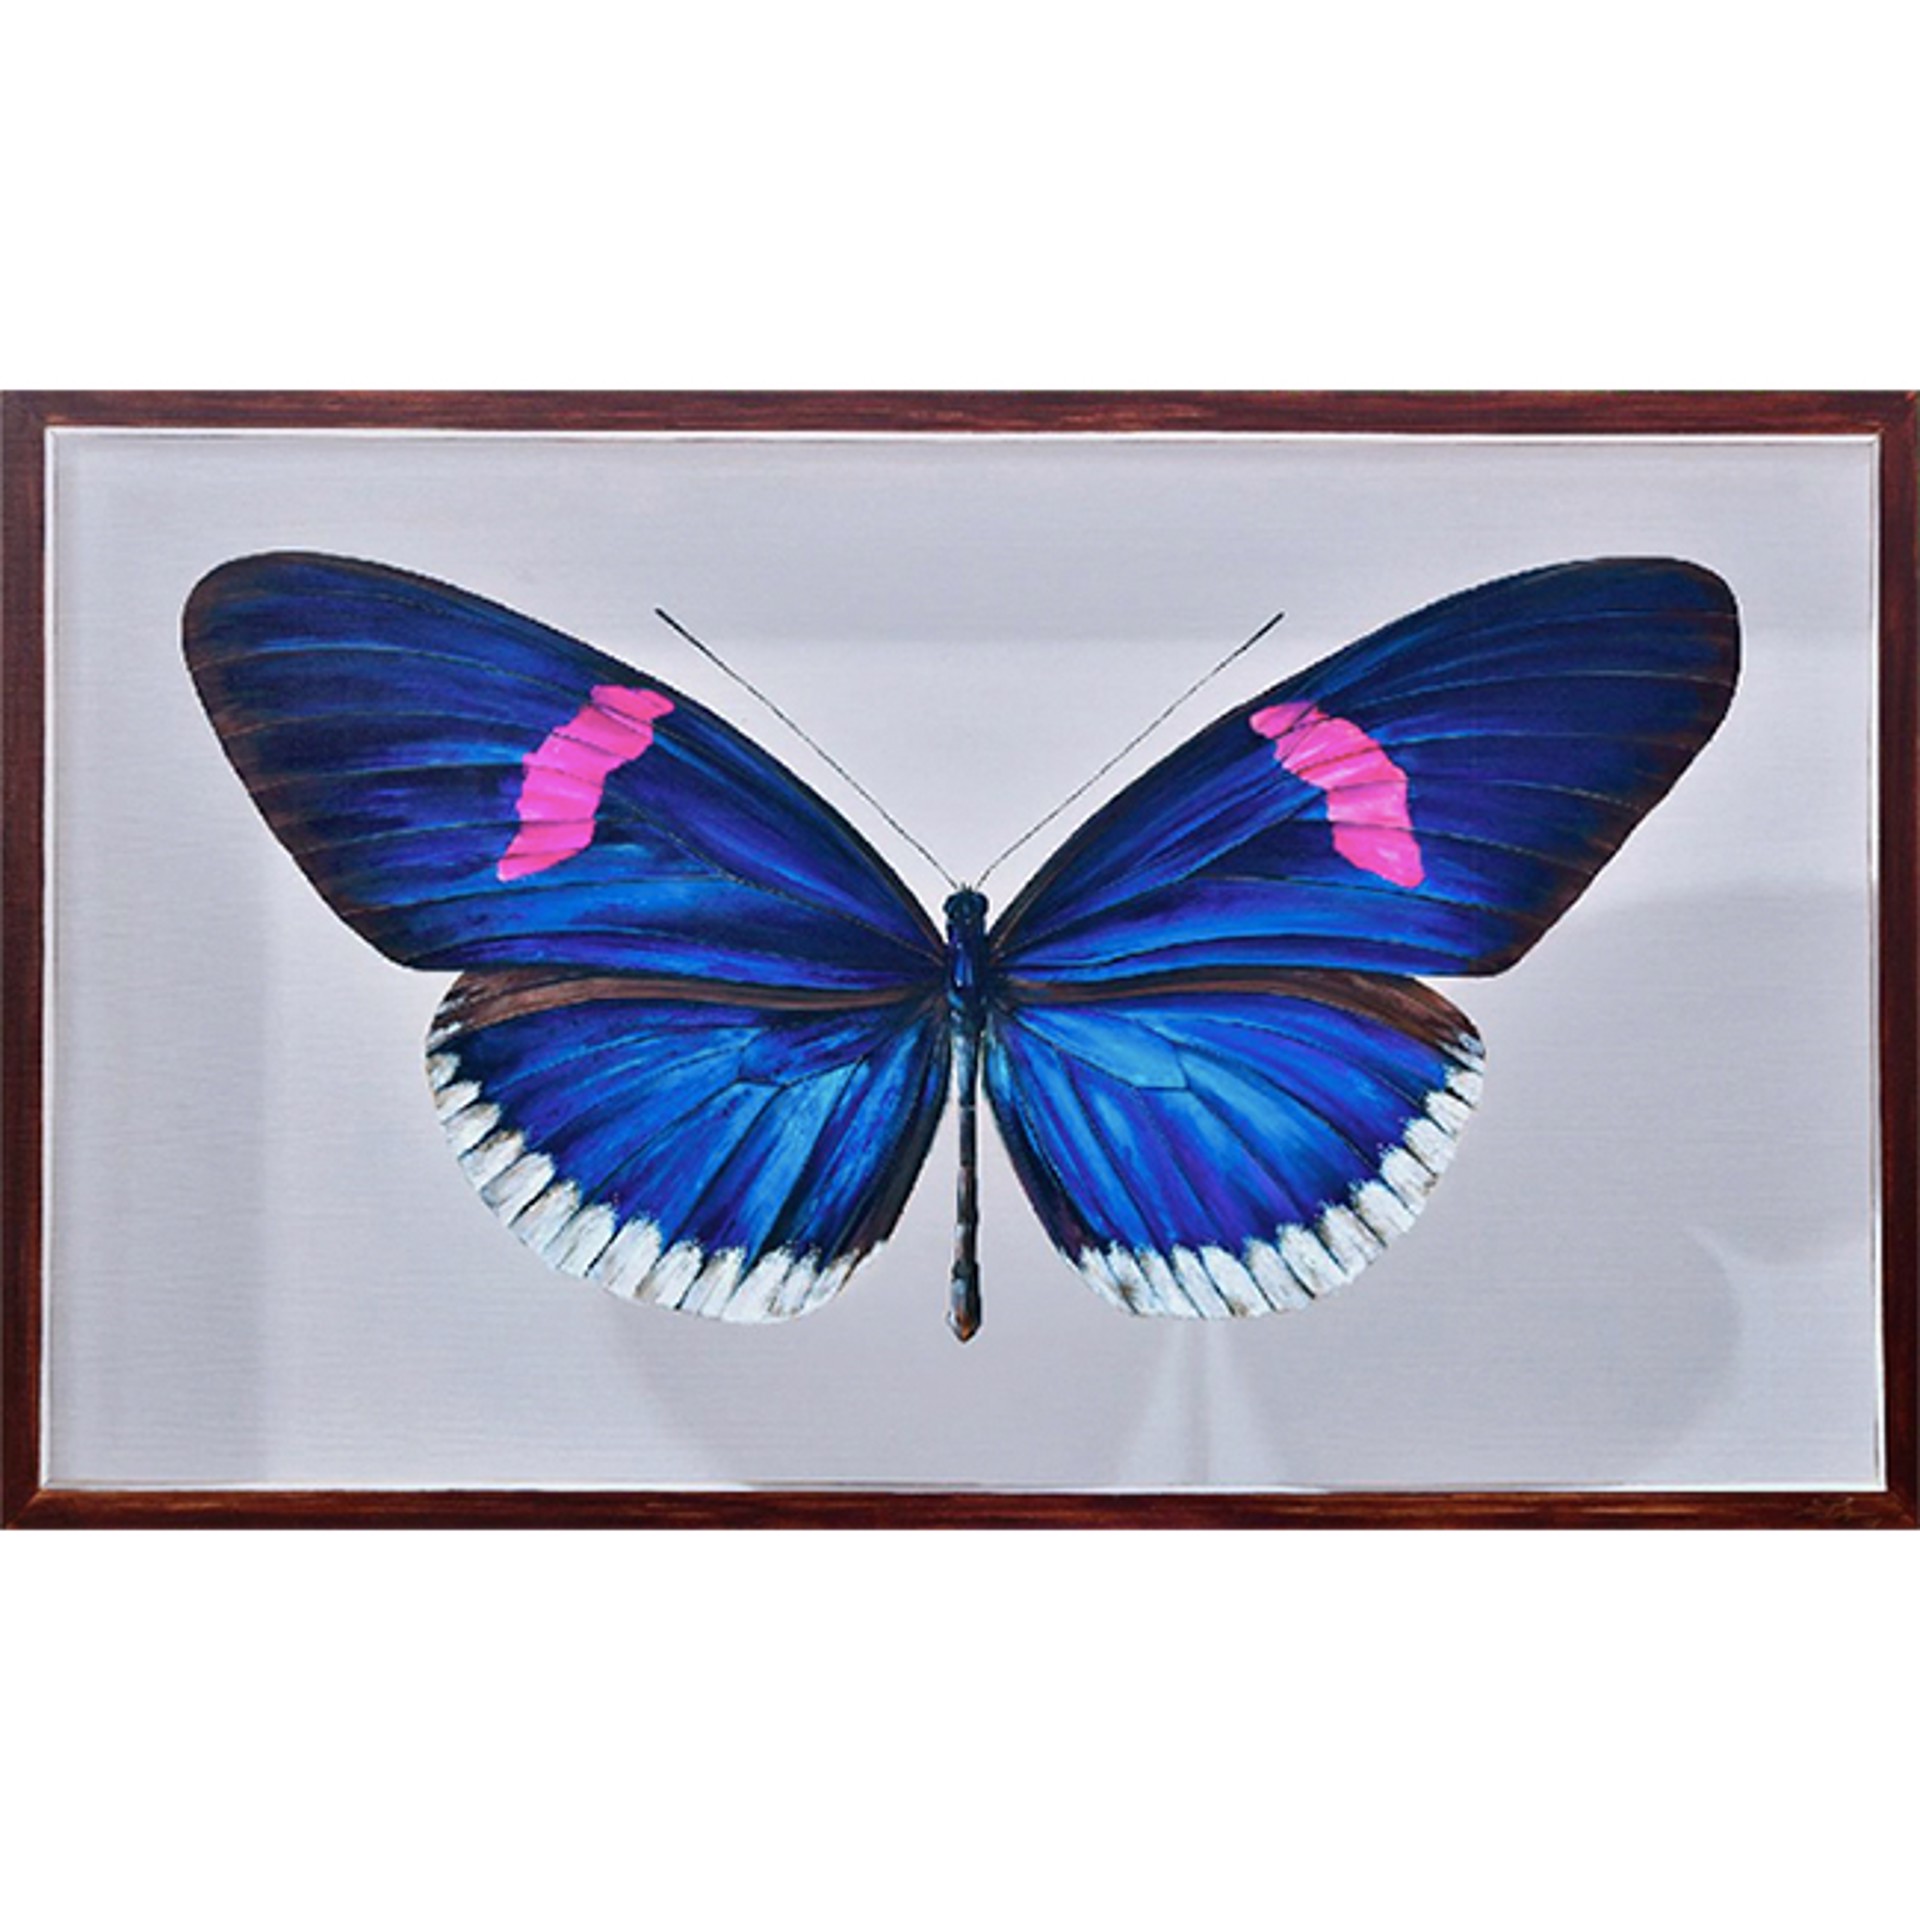 The Giant Collection: Heliconius Erato Cyrbia by Youri Cansell aka Mantra